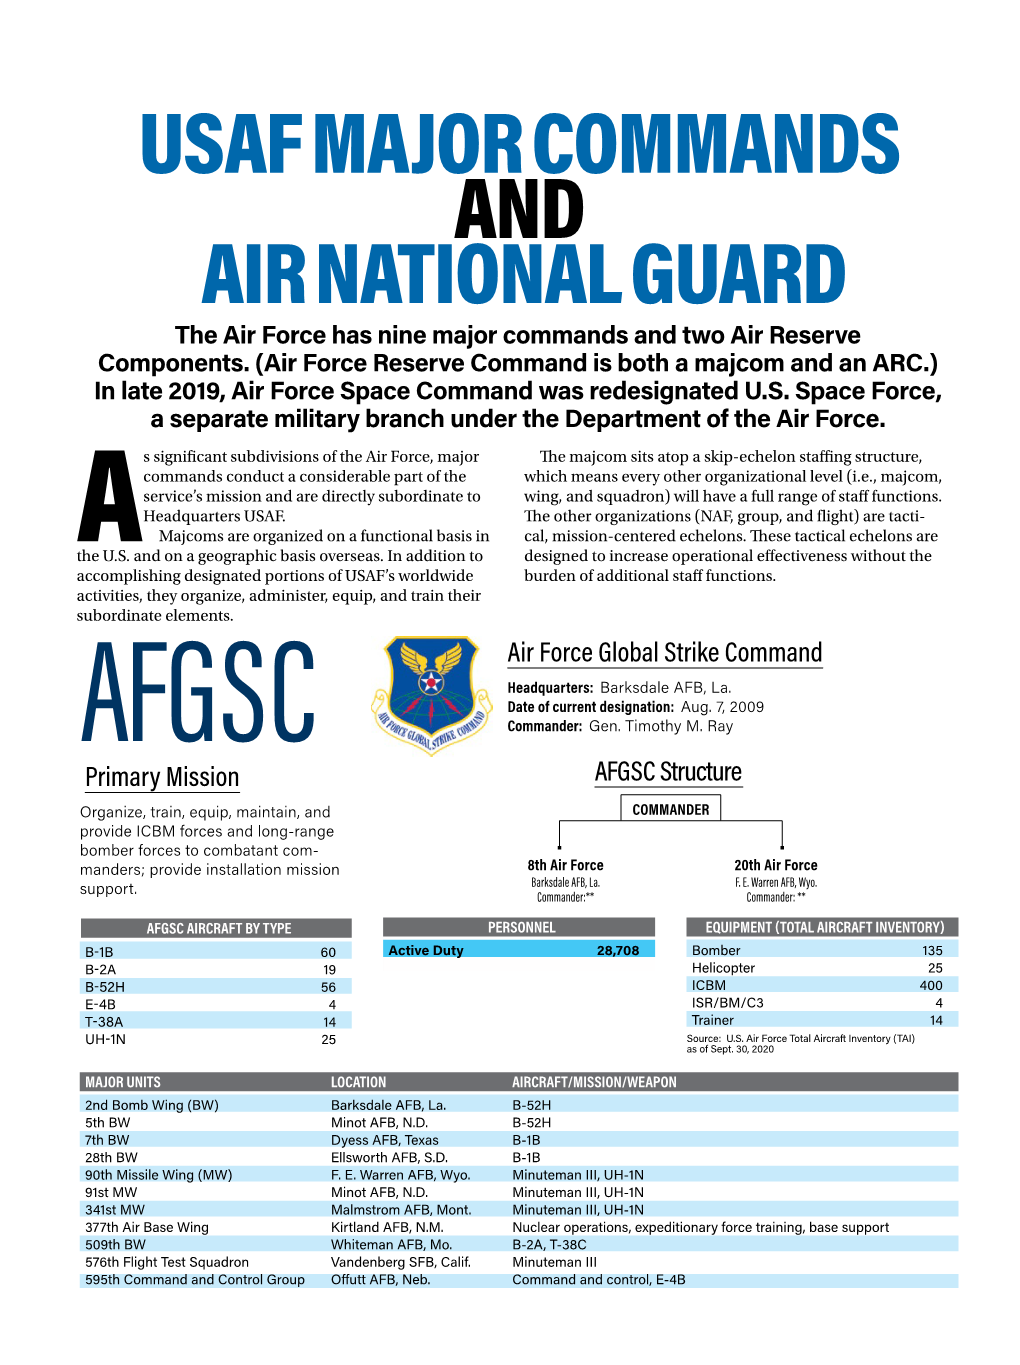 USAF MAJOR COMMANDS and AIR NATIONAL GUARD the Air Force Has Nine Major Commands and Two Air Reserve Components